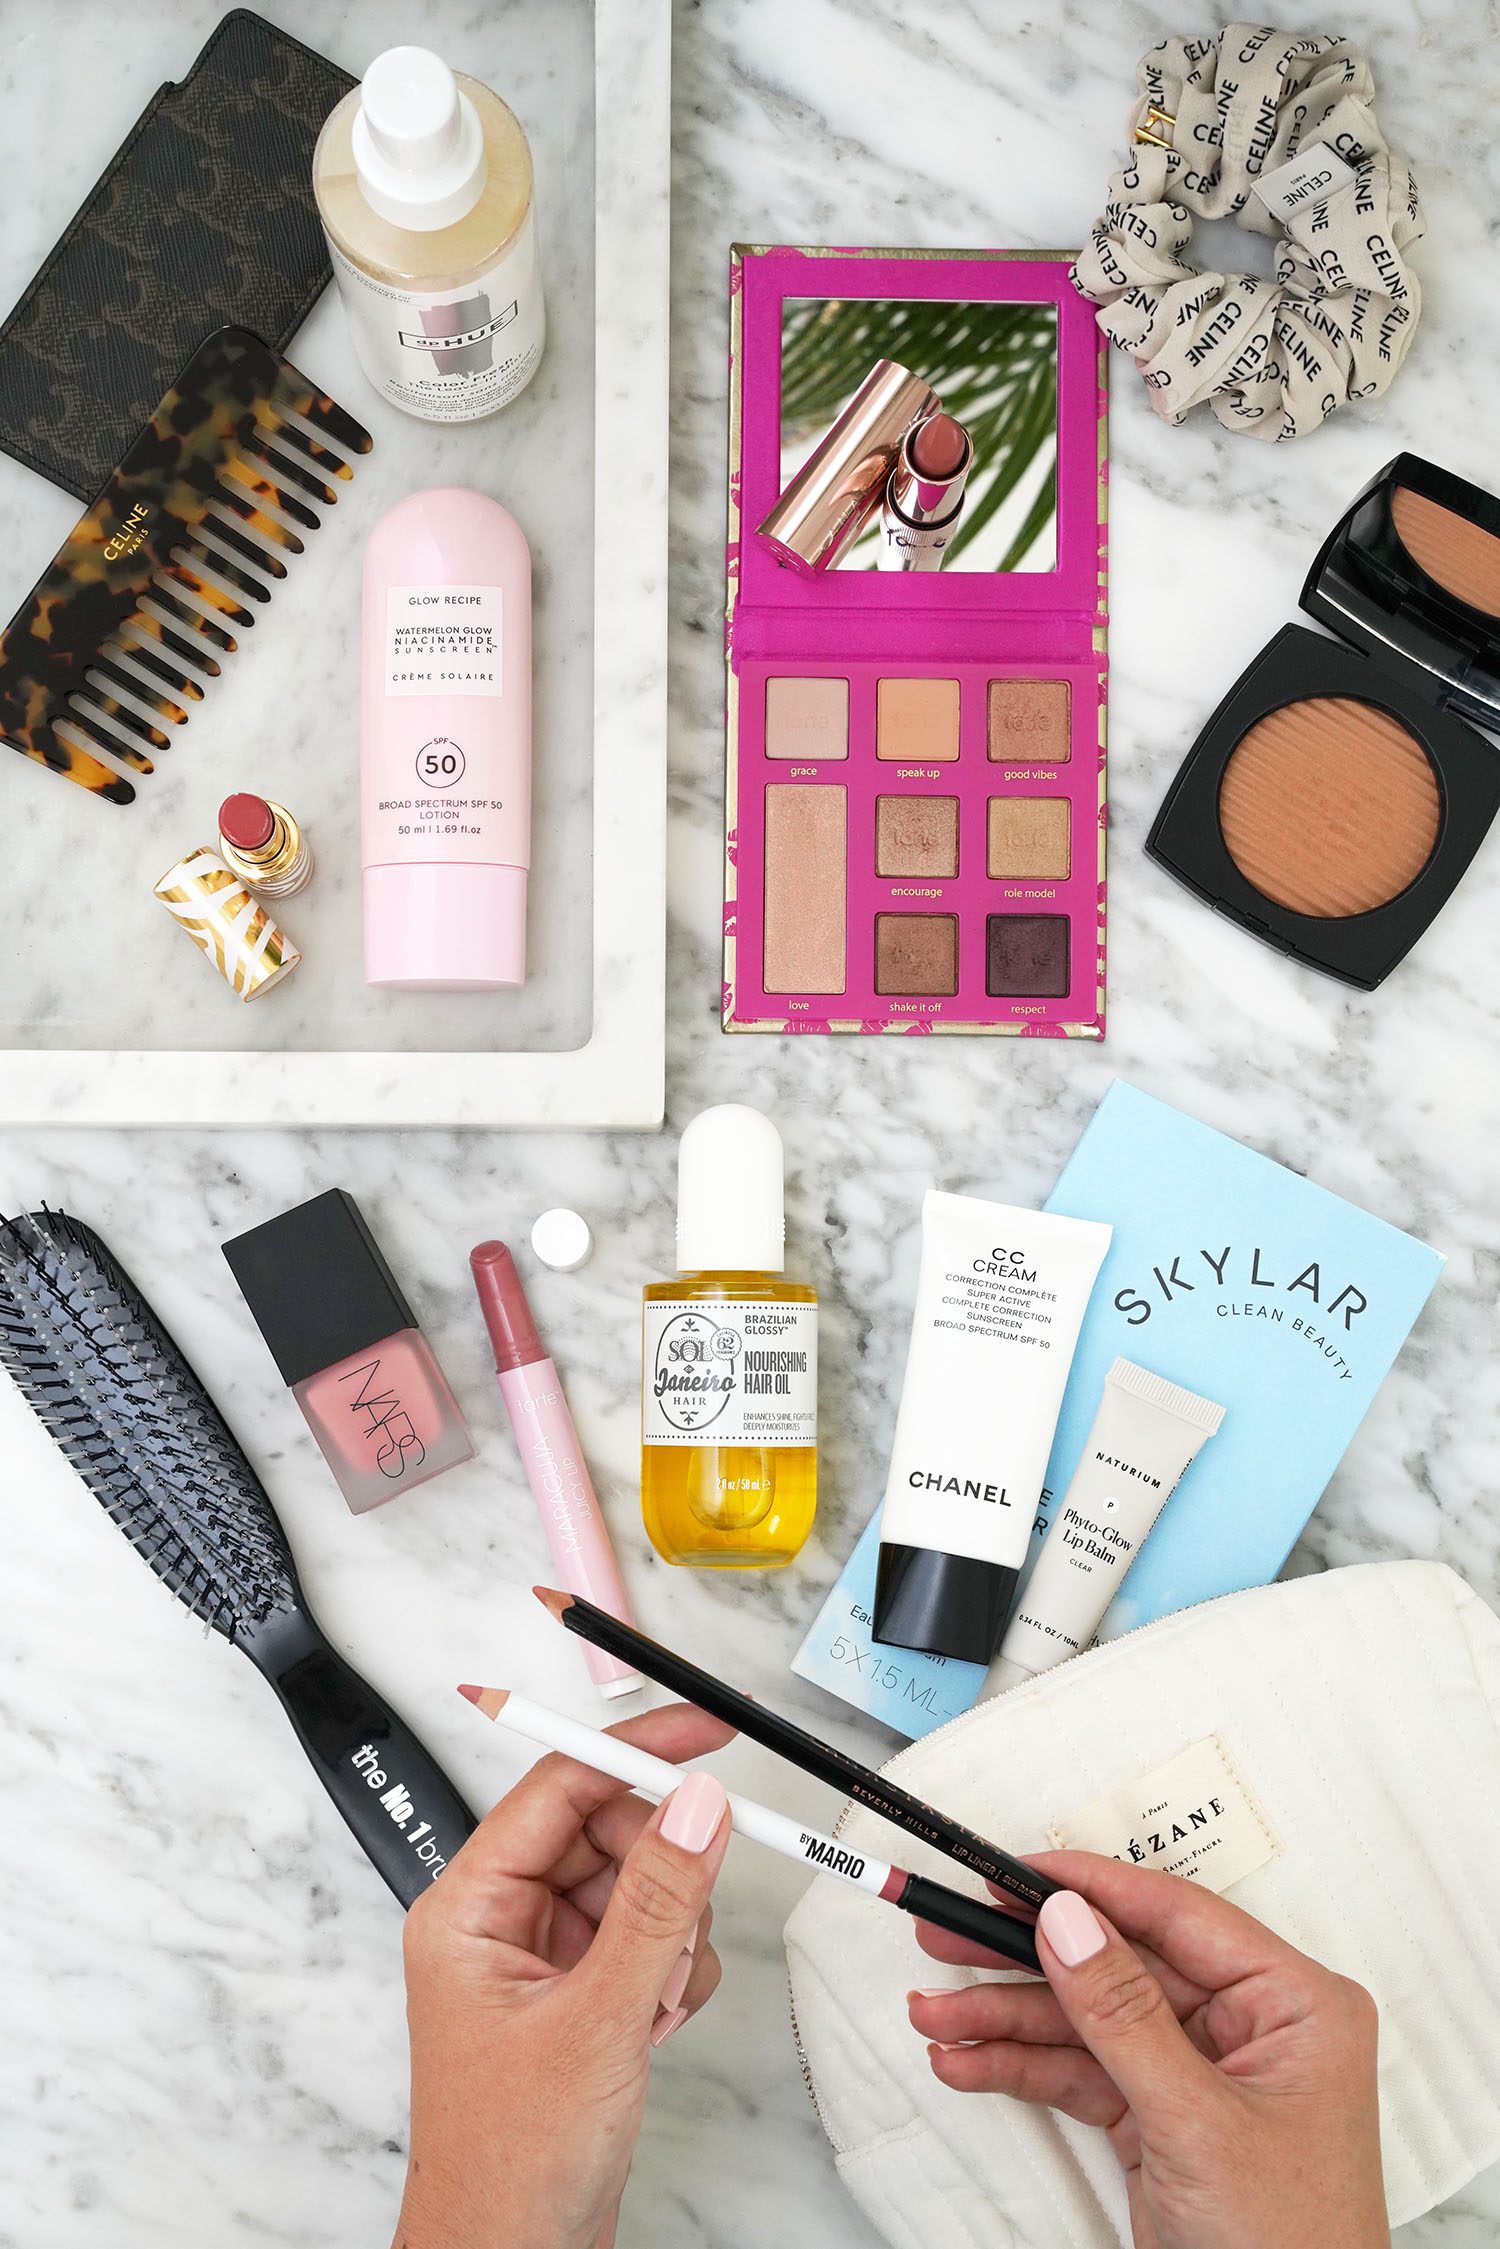 Holiday Gift Ideas For the Girls Who Have Everything - The Beauty Look Book